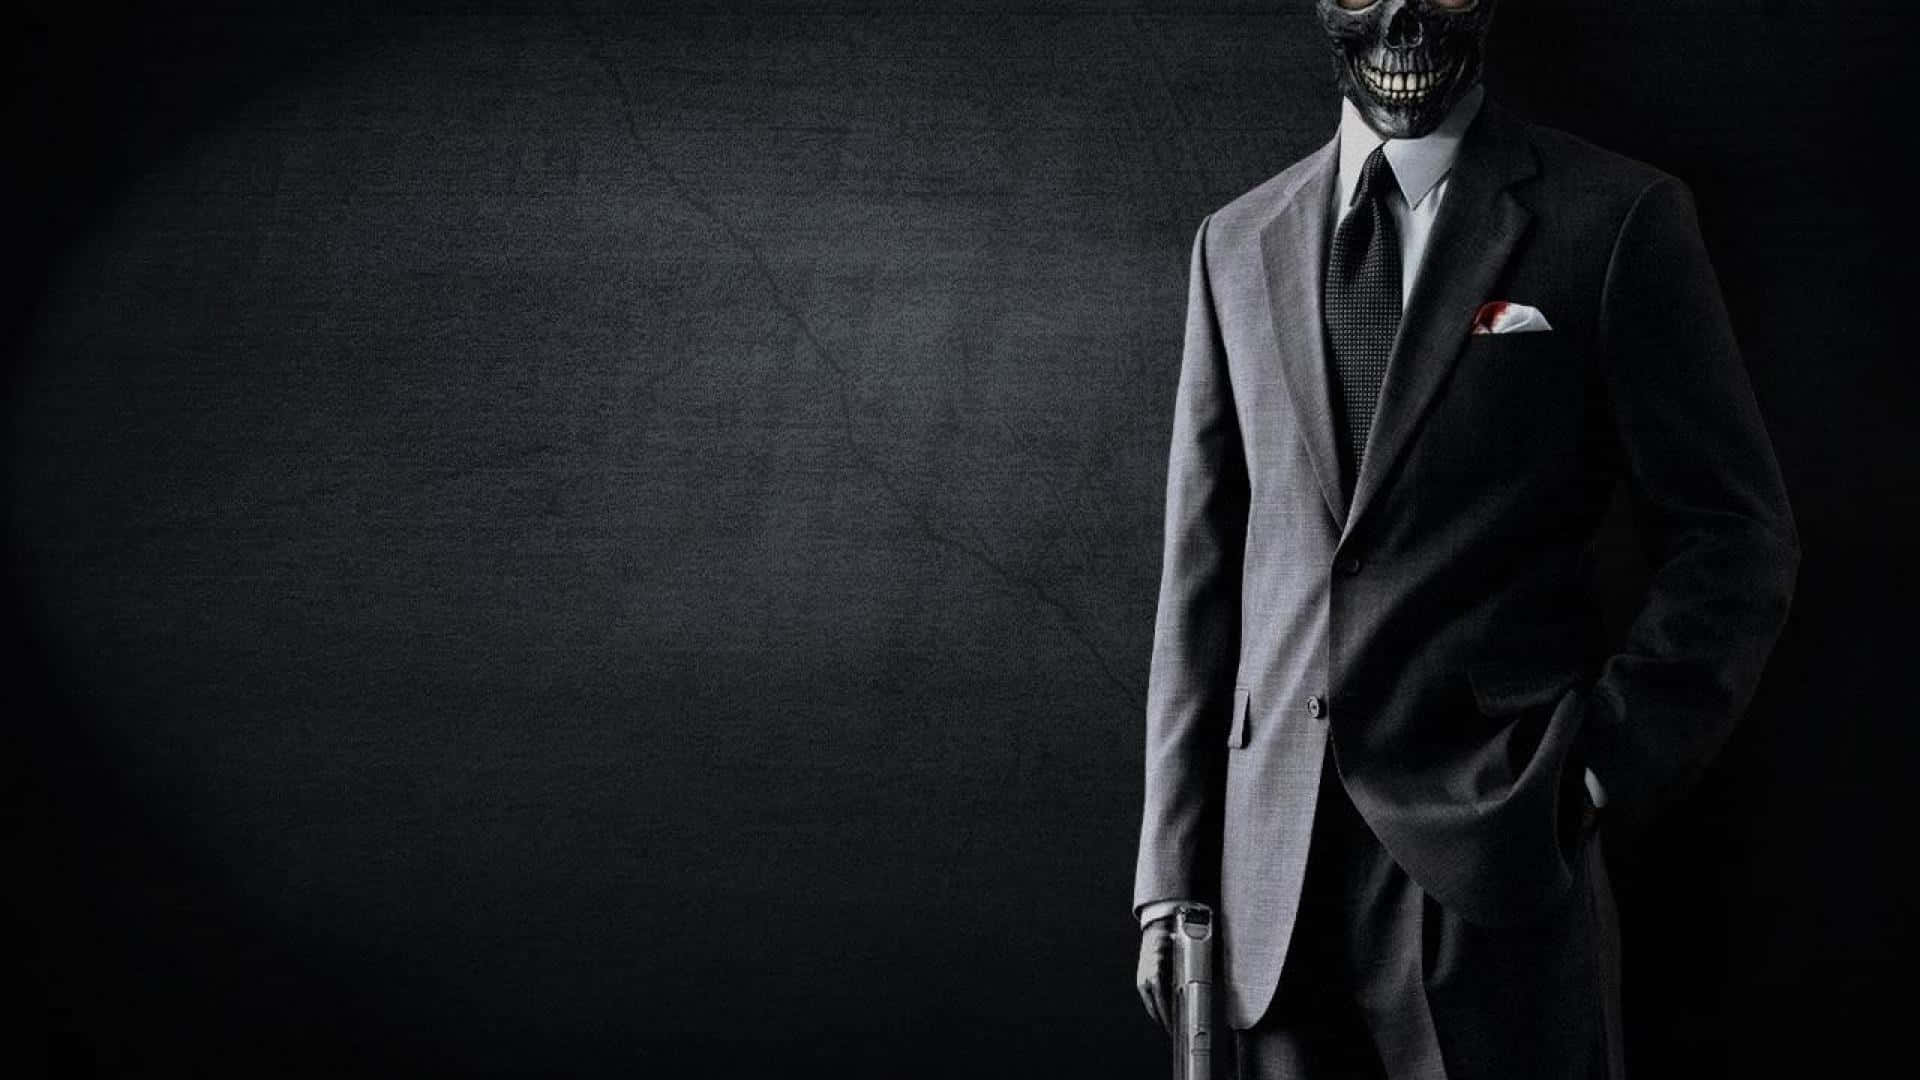 Man In Suit With Skull Face Wallpaper